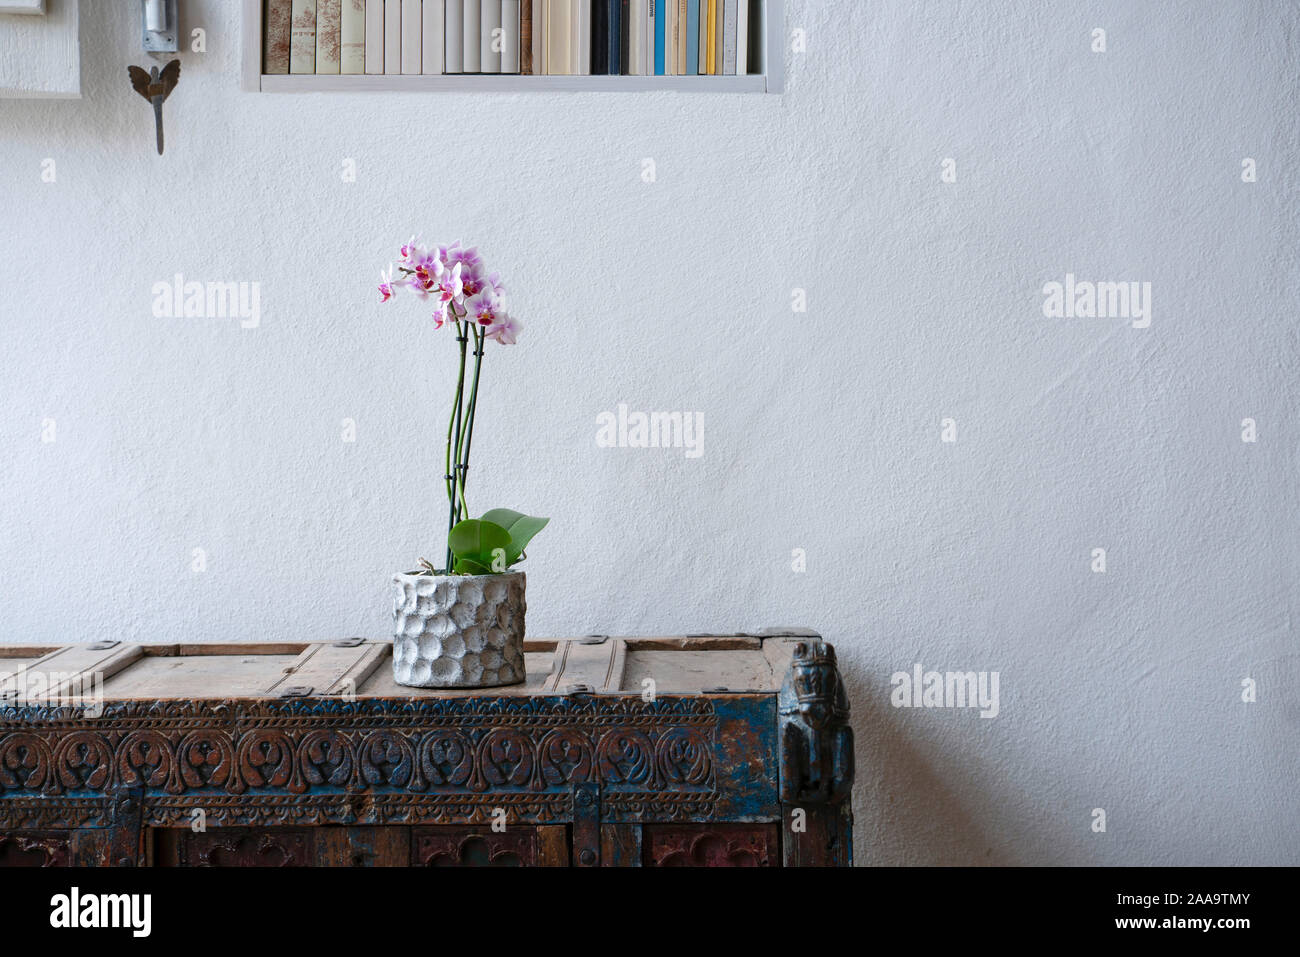 Orchid in a pot on a wooden rustic stylish cabinet in front of a white wall with bookcase Stock Photo